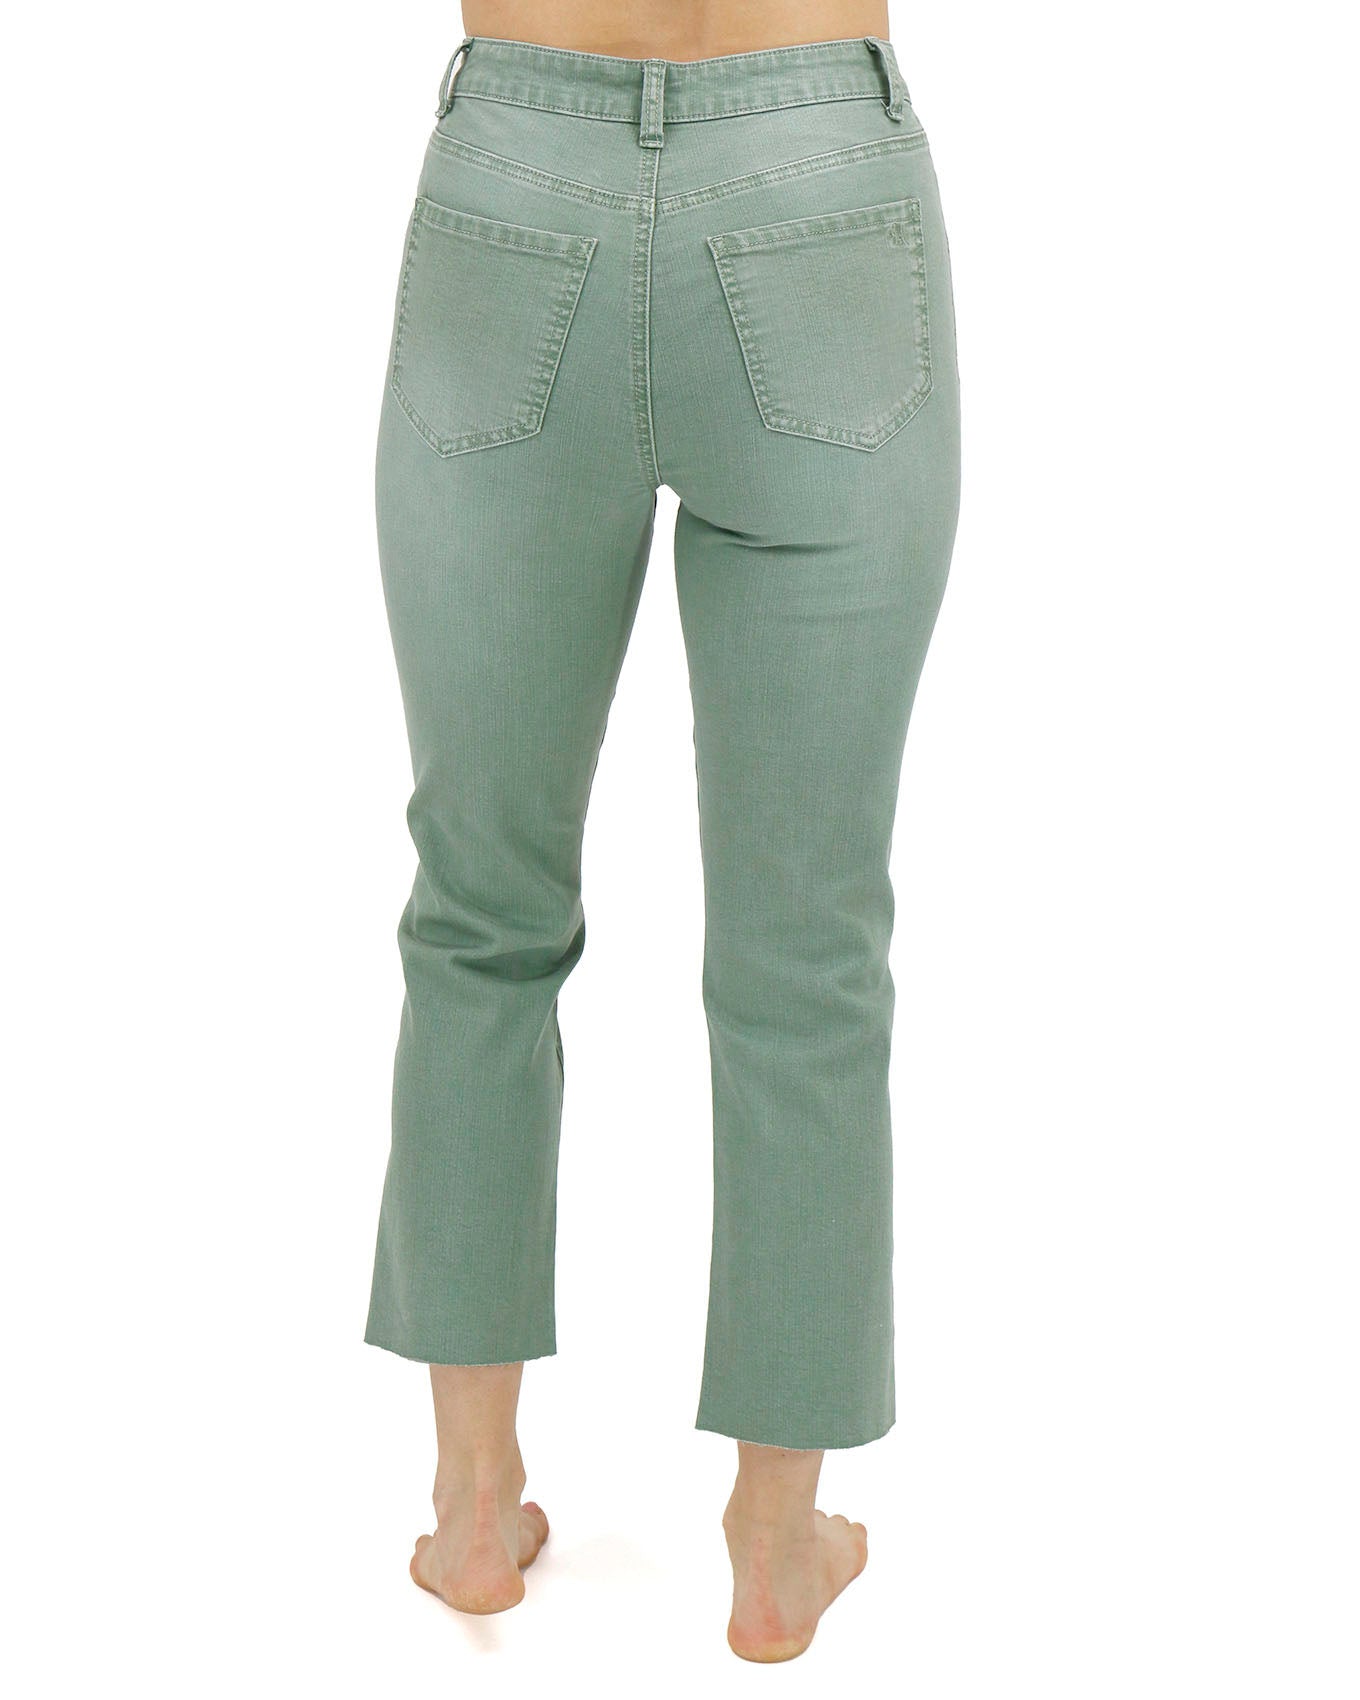 Back stock shot of Dusty Olive Mel’s Fave Distressed Cropped Straight Leg Colored Denim